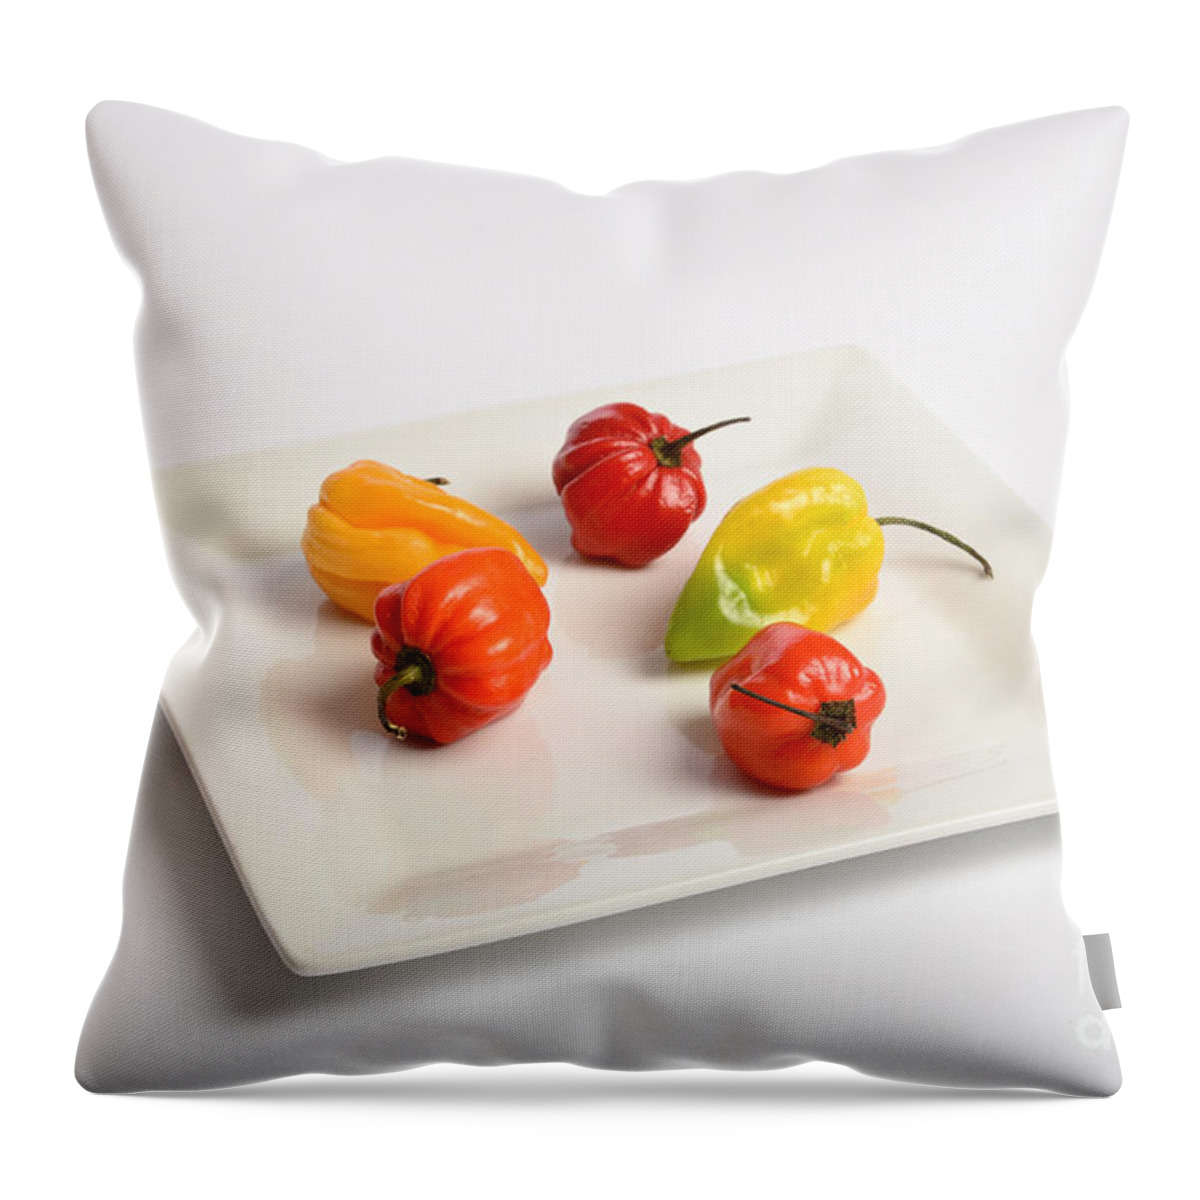 Chili Throw Pillow featuring the photograph Habanero Chili Pepper #4 by Photo Researchers, Inc.